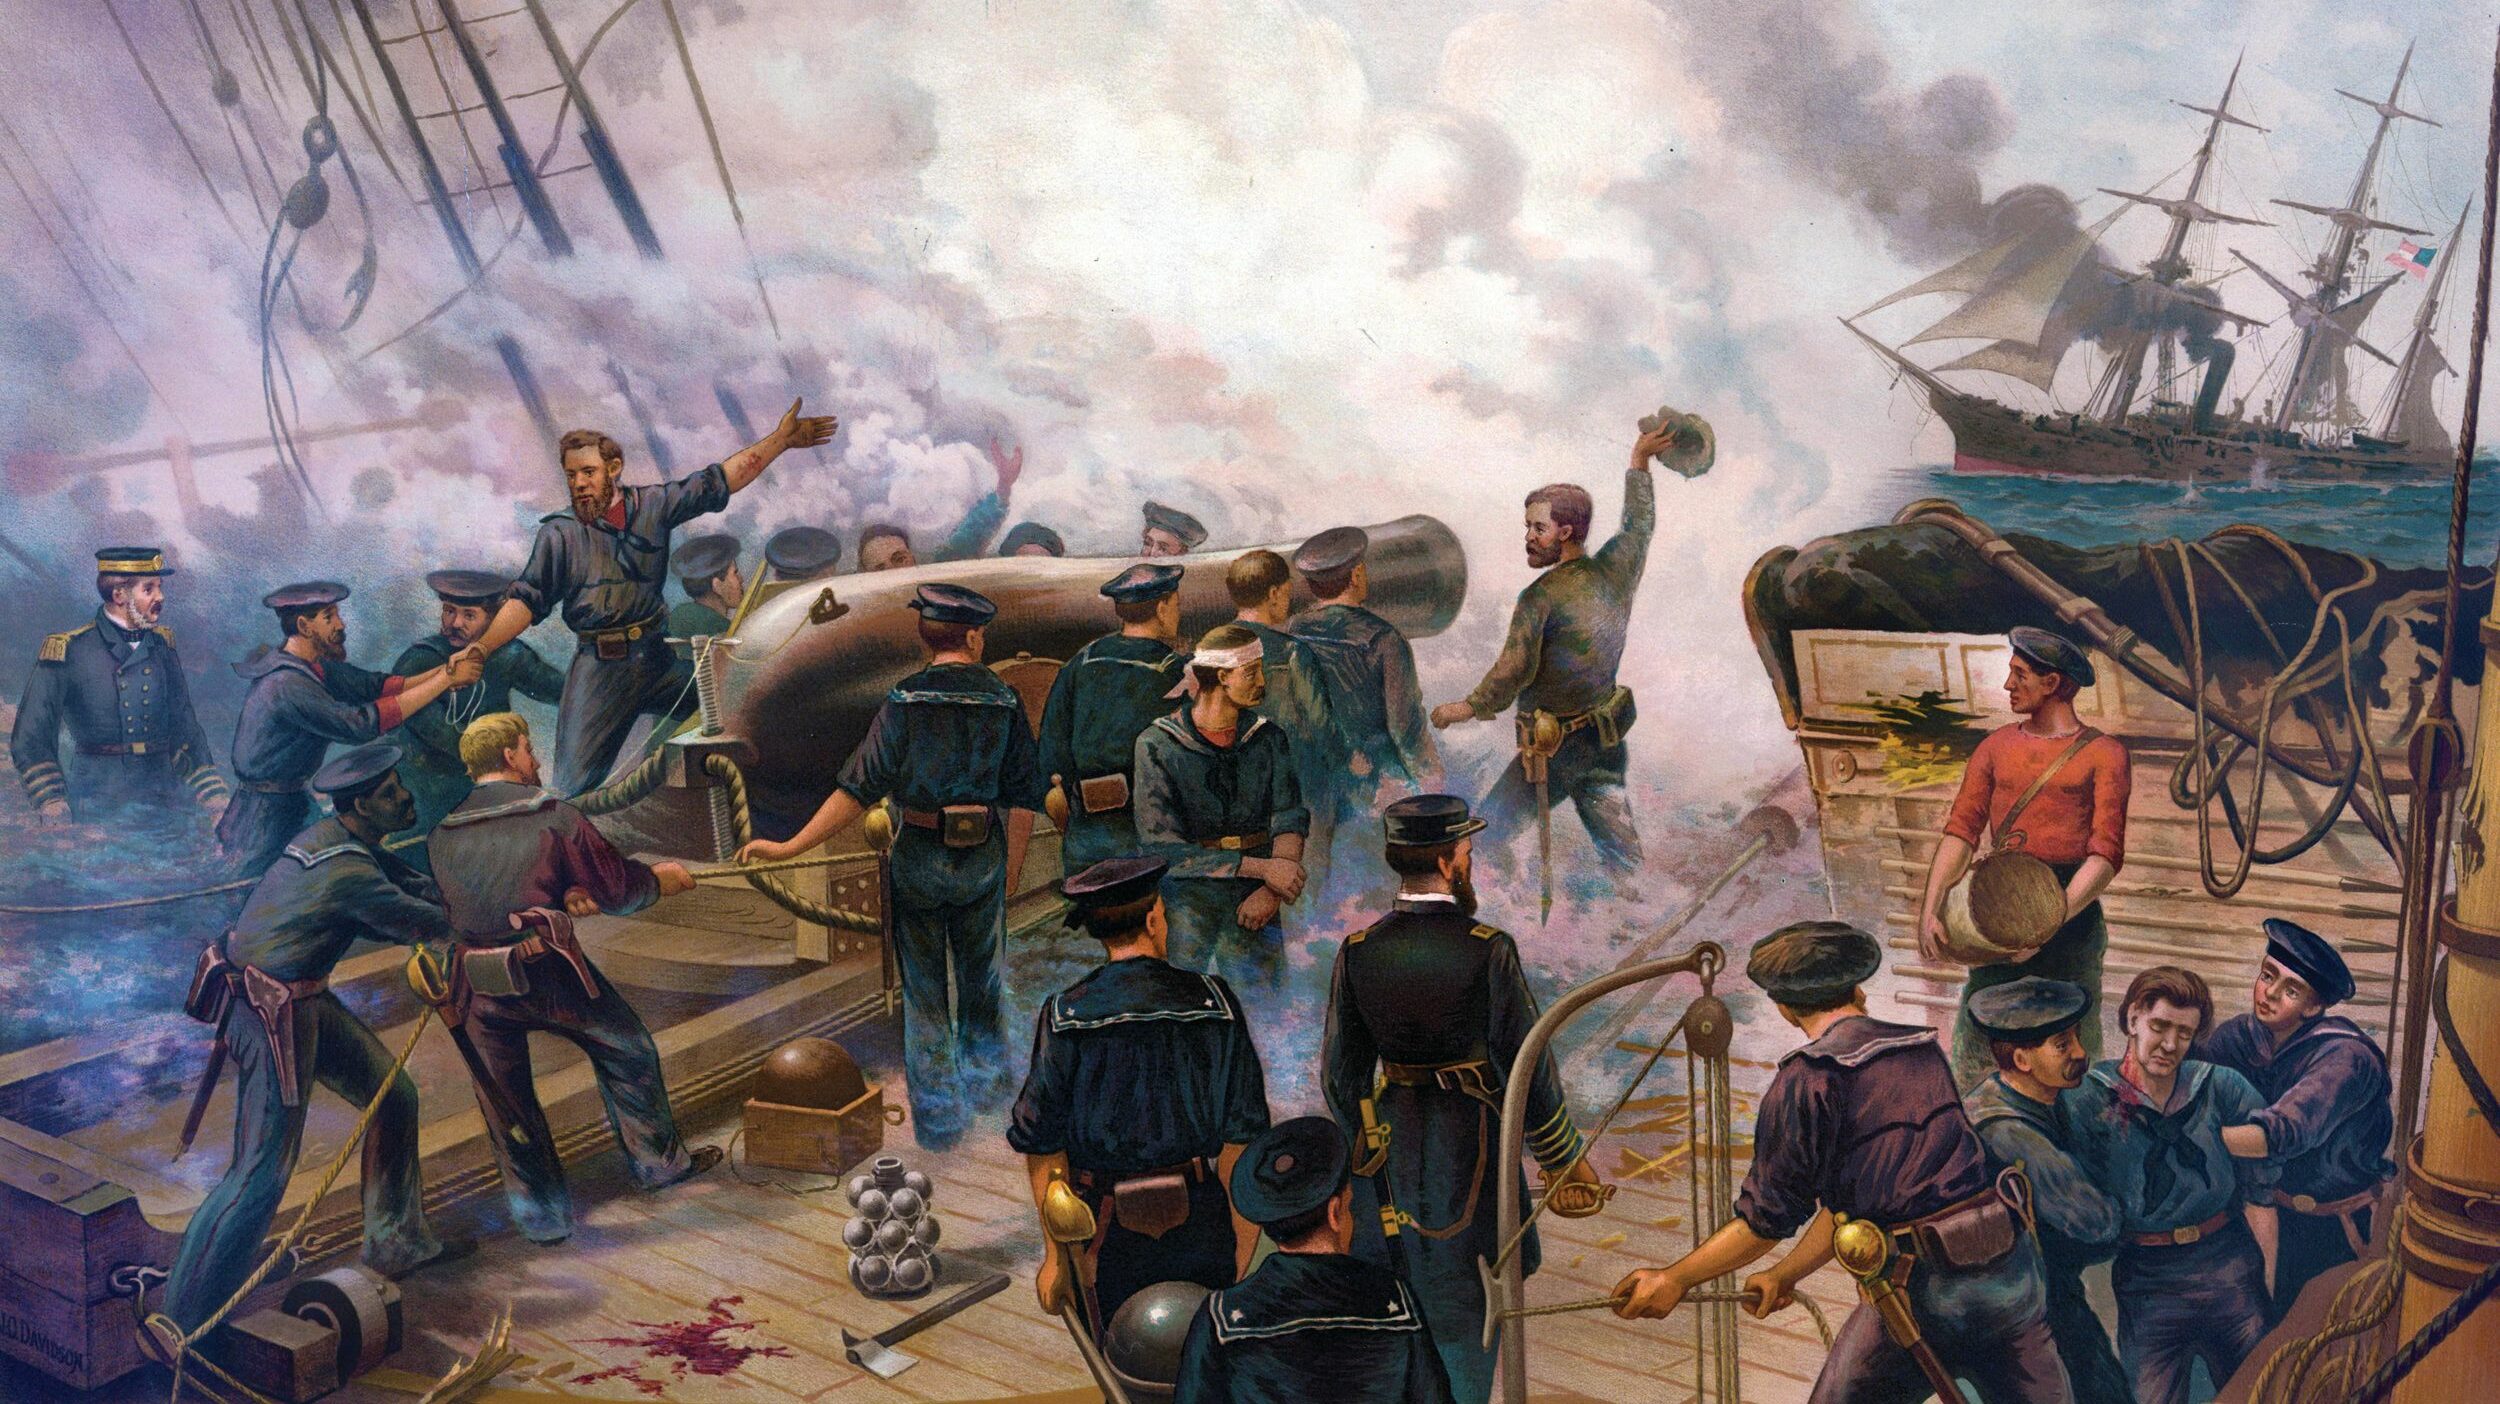 The crew of an 11-inch Dahlgren pivot gun aboard the USS Kearsarge cheers the surrender of the CSS Alabama on June 19, 1864, in J.O. Davidson's painting of the historic naval battle. Captain Raphael Semmes, the commander of the Confederate raider, struck his flag when his ship began sinking.